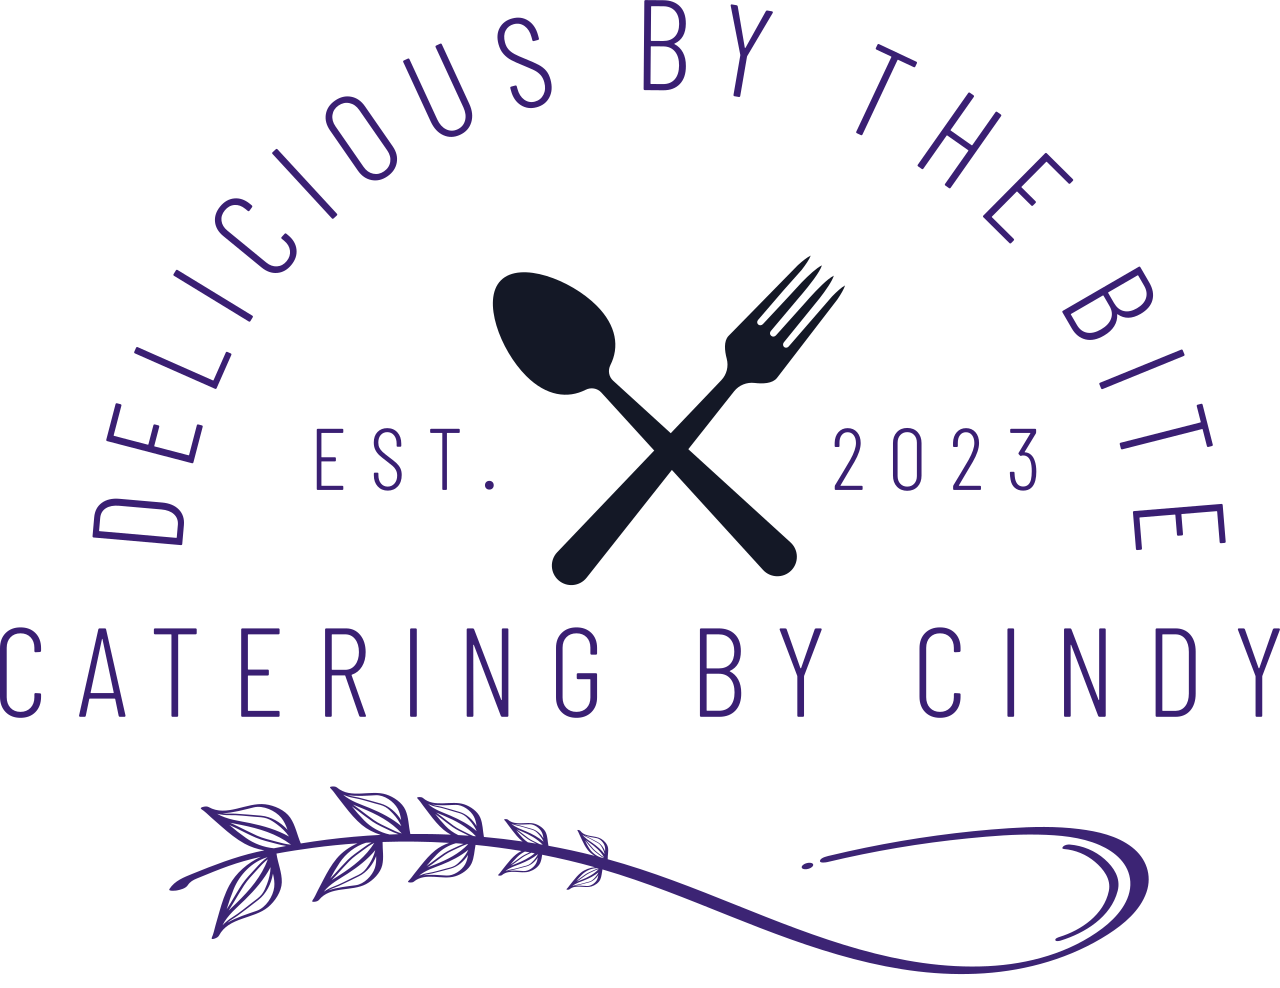 DELICIOUS BY THE BITE's logo